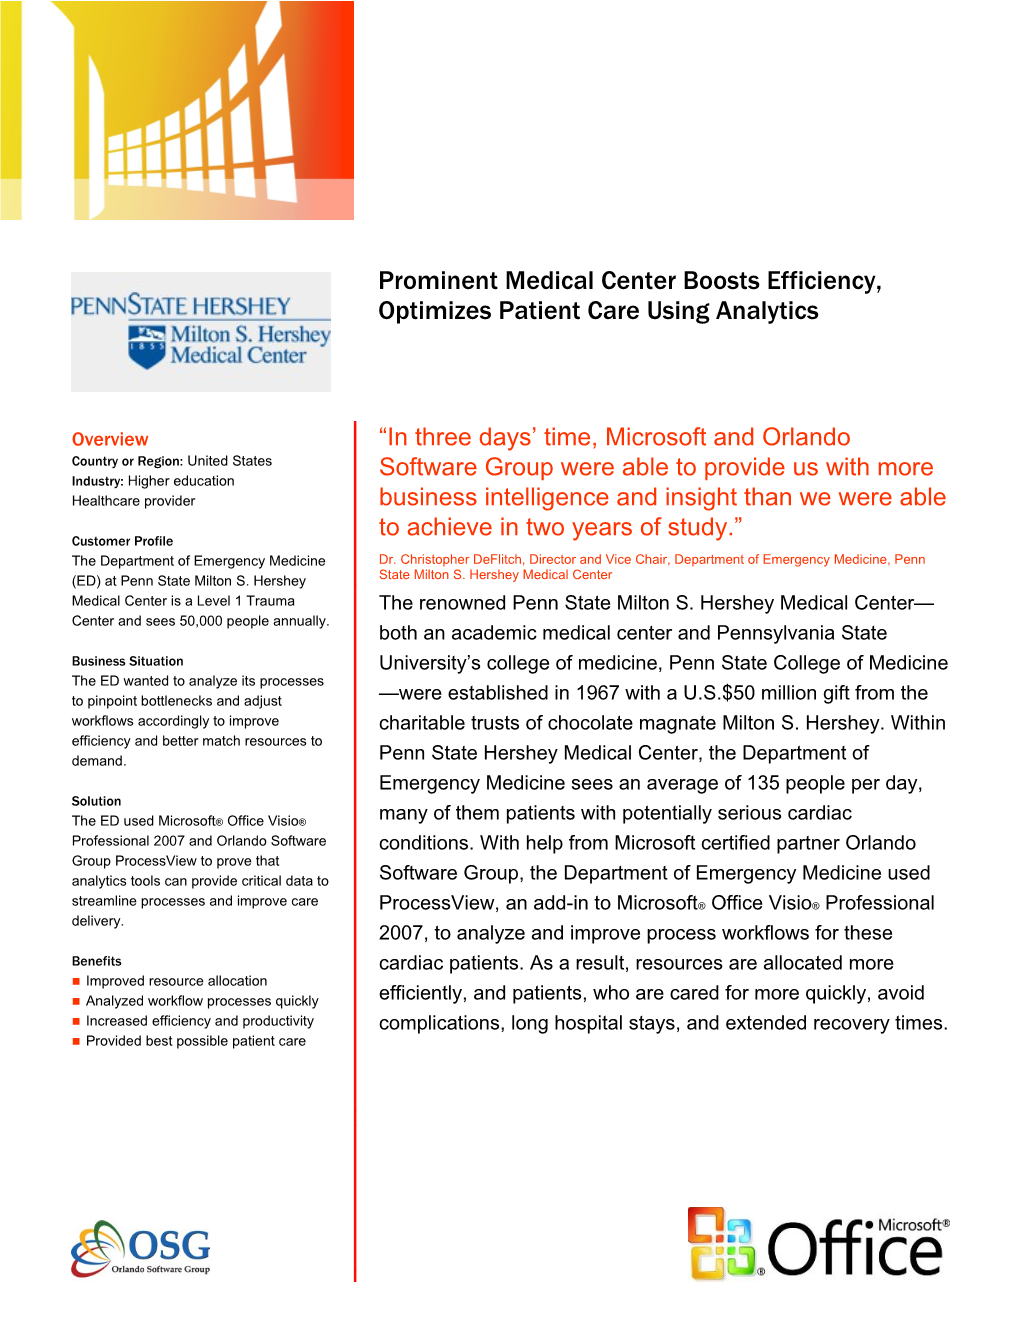 Prominent Medical Center Boosts Efficiency, Optimizes Patient Care Using Analytics